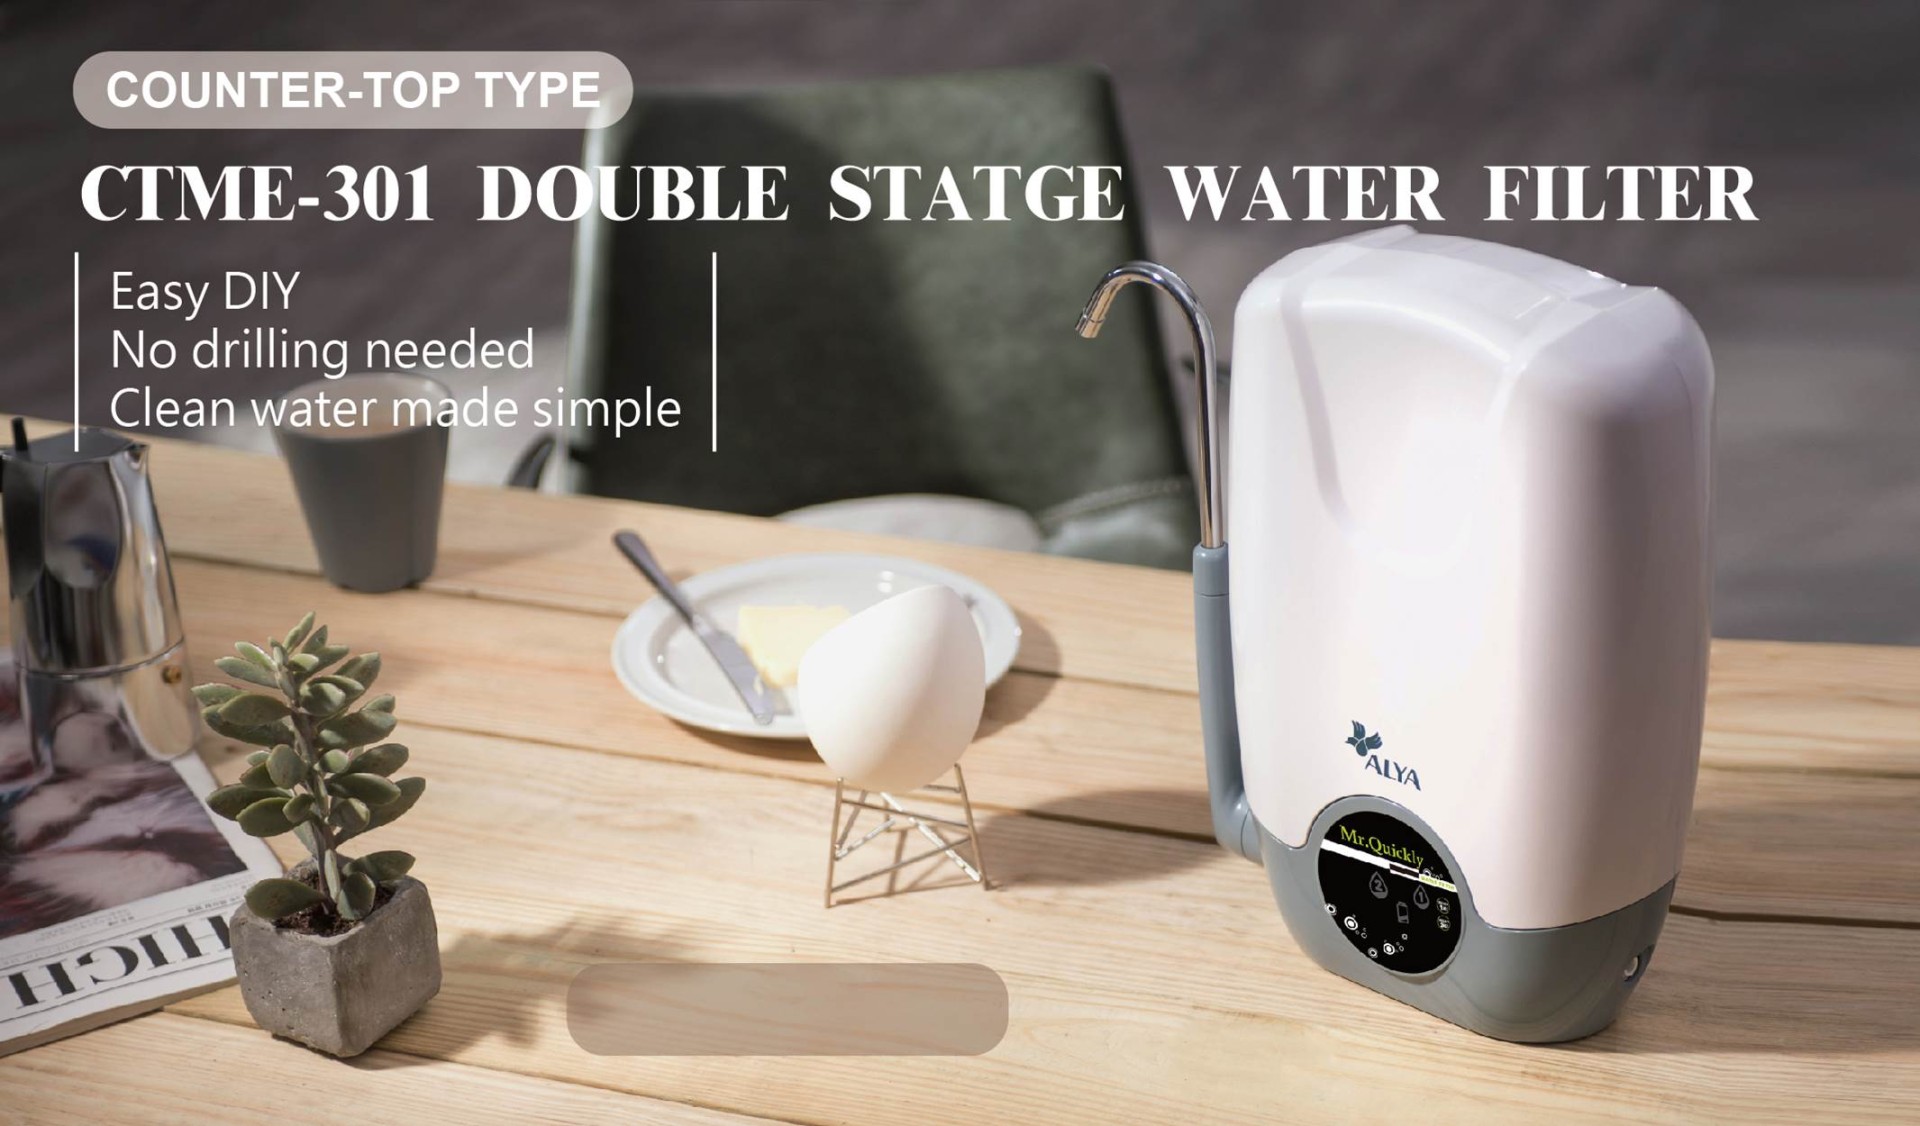 Double stages water filter